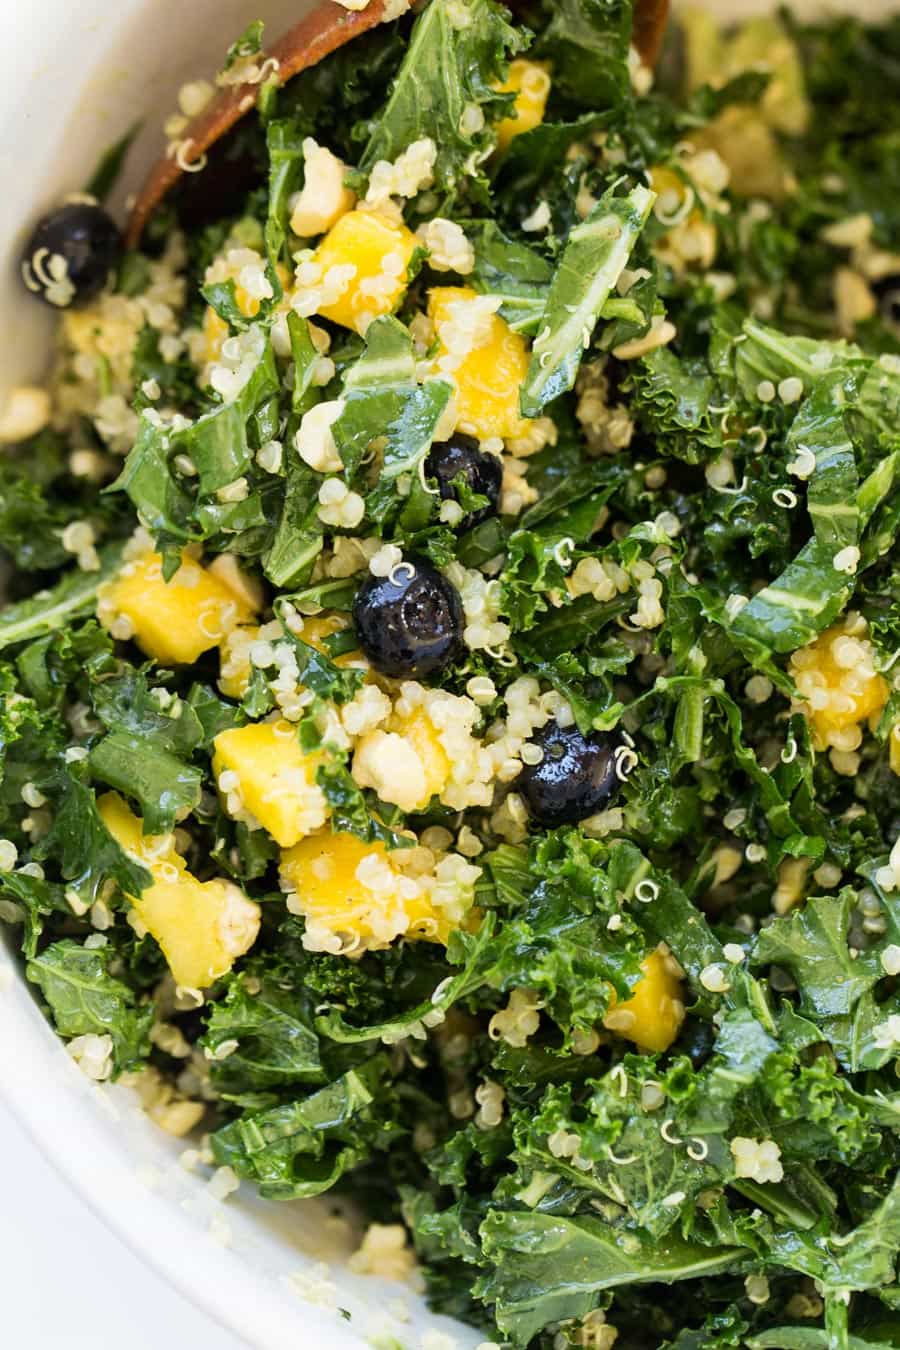 Tropical Kale & Quinoa Power Salad with all the power-packed goodies!